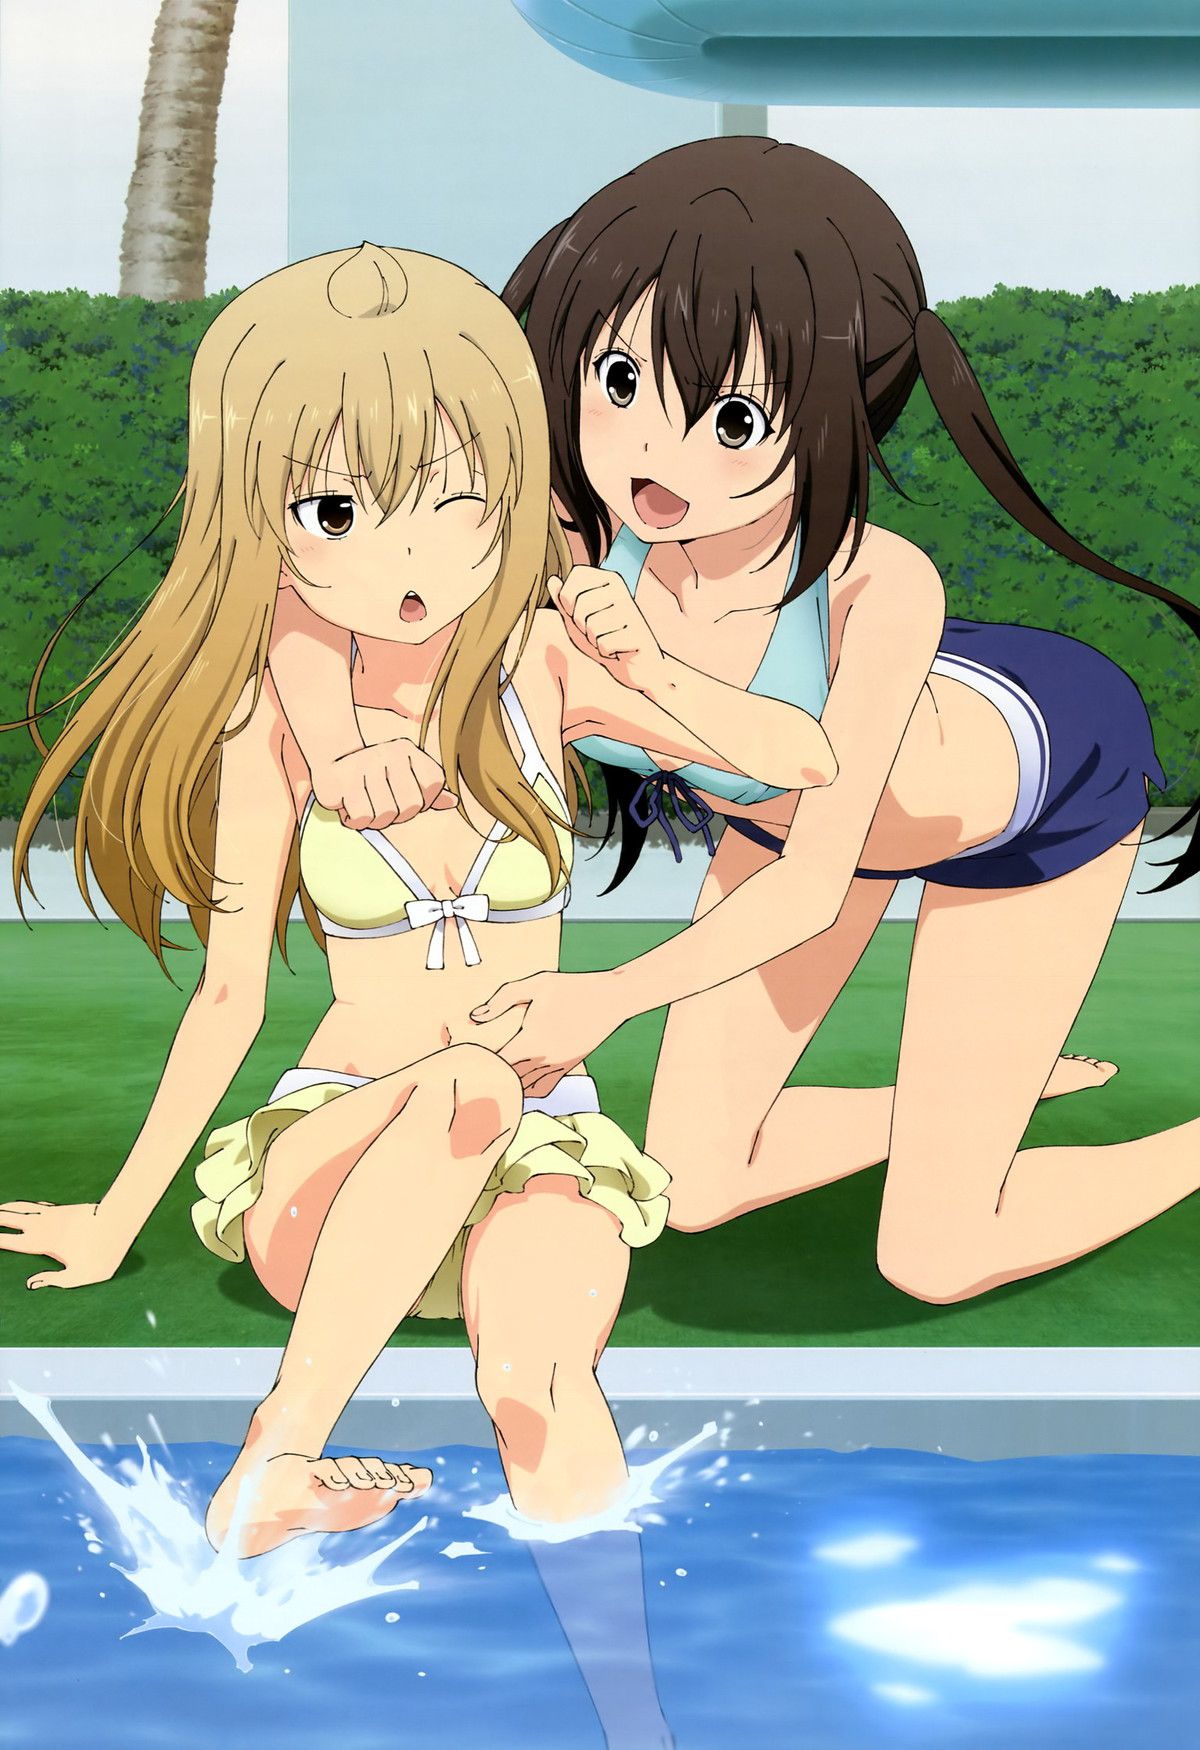 The official image of beautiful girl anime is too cute erotic wwwwwww 2